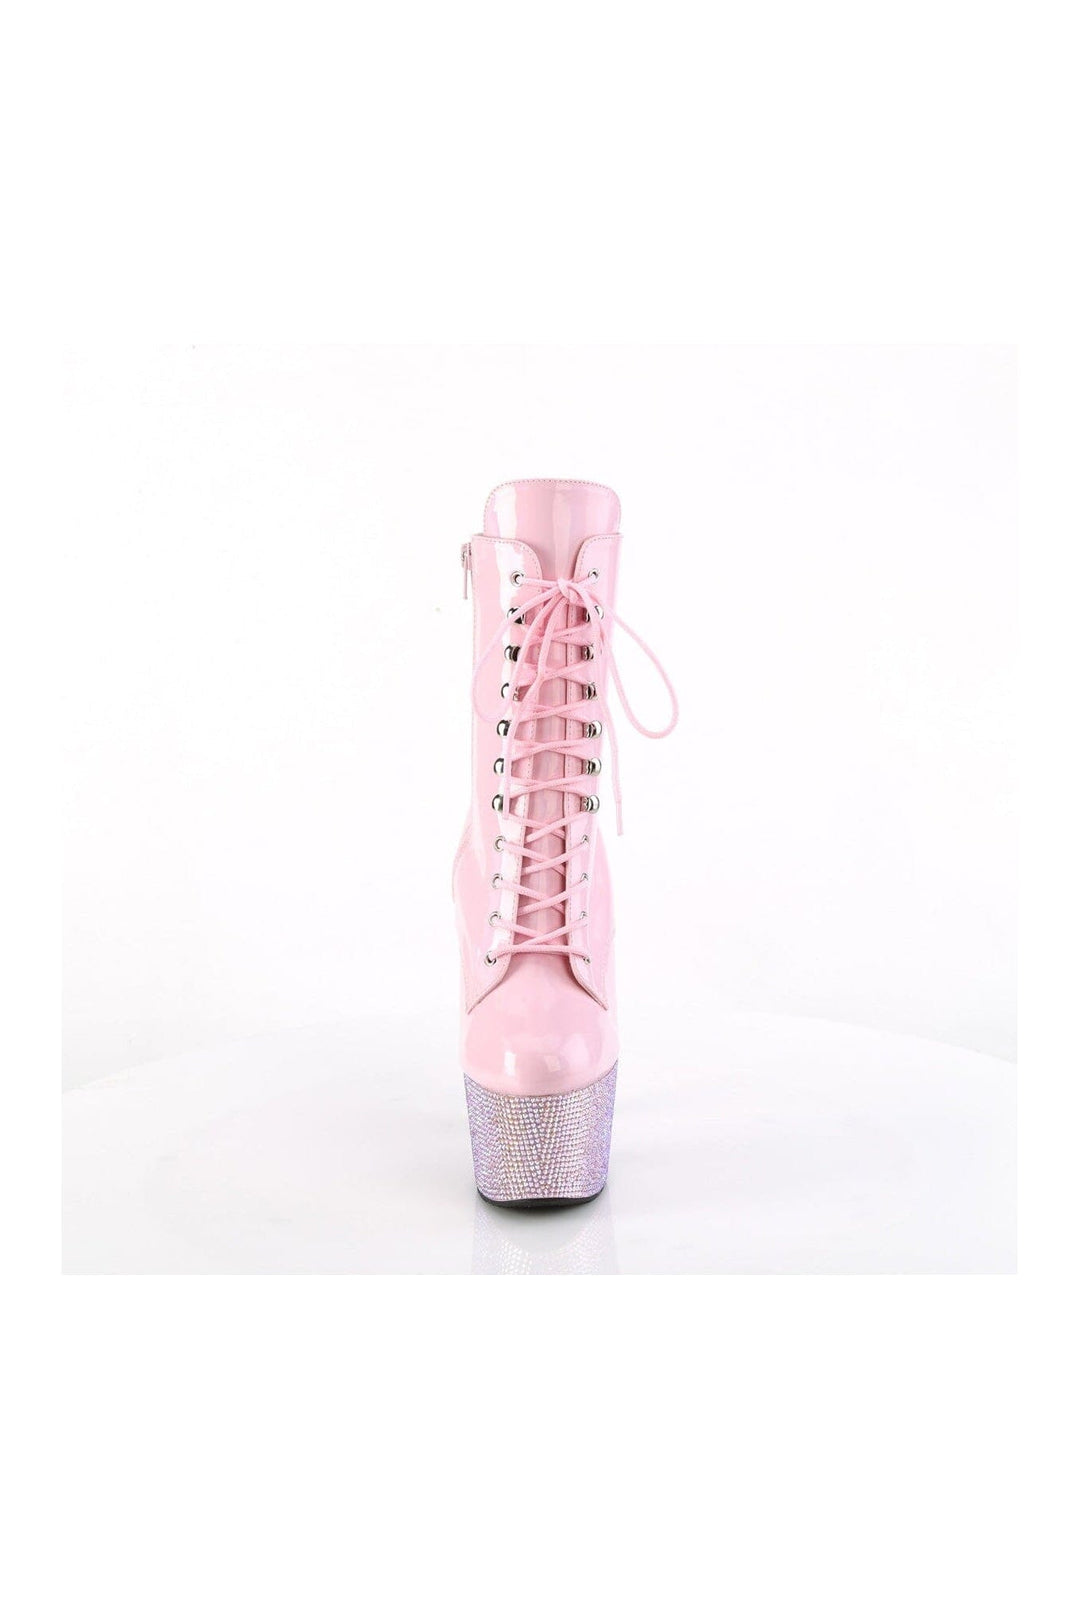 BEJEWELED-1020-7 Pink Patent Ankle Boot-Ankle Boots-Pleaser-SEXYSHOES.COM